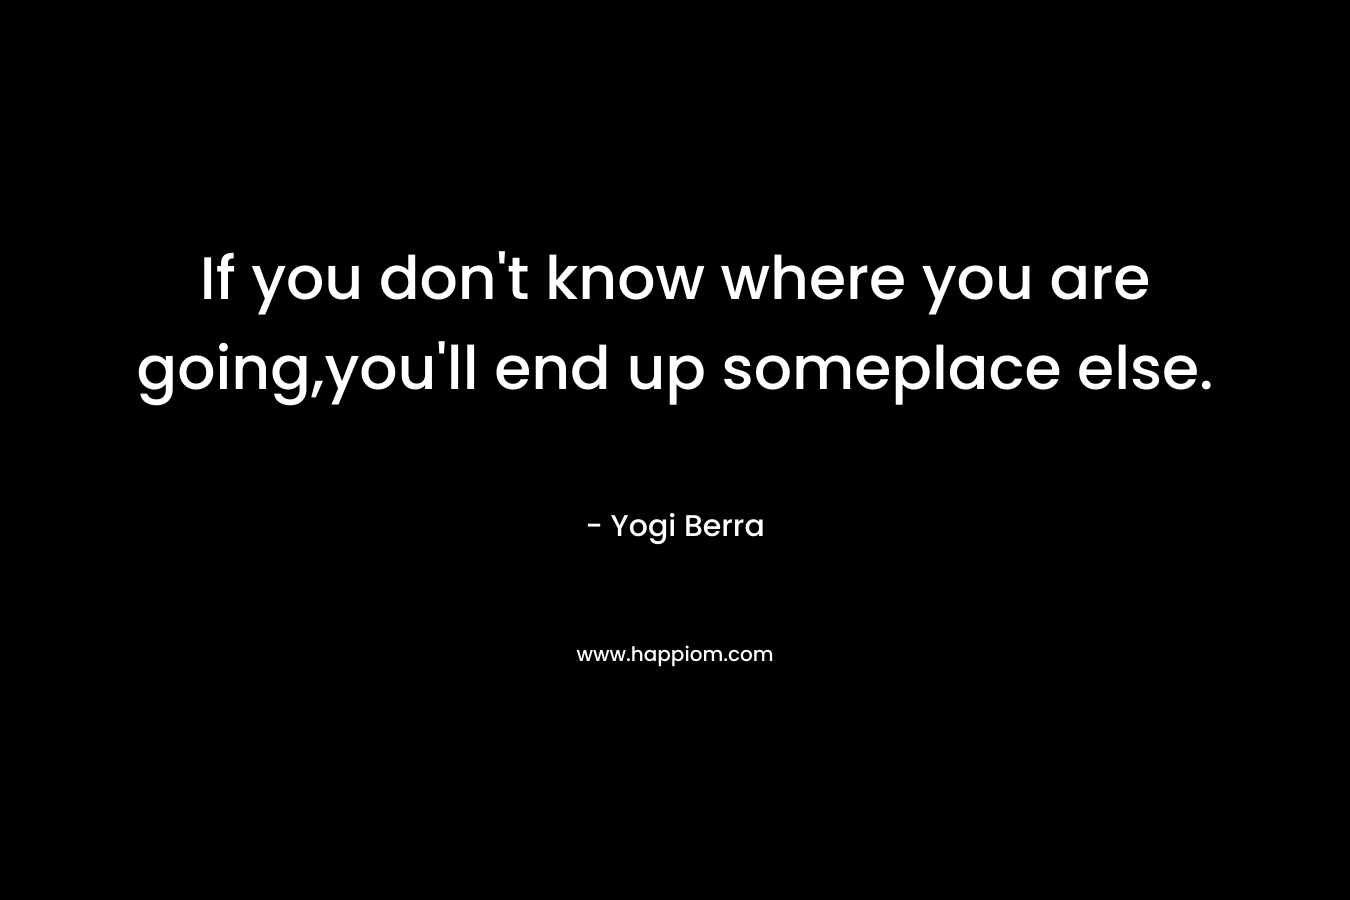 If you don’t know where you are going,you’ll end up someplace else. – Yogi Berra